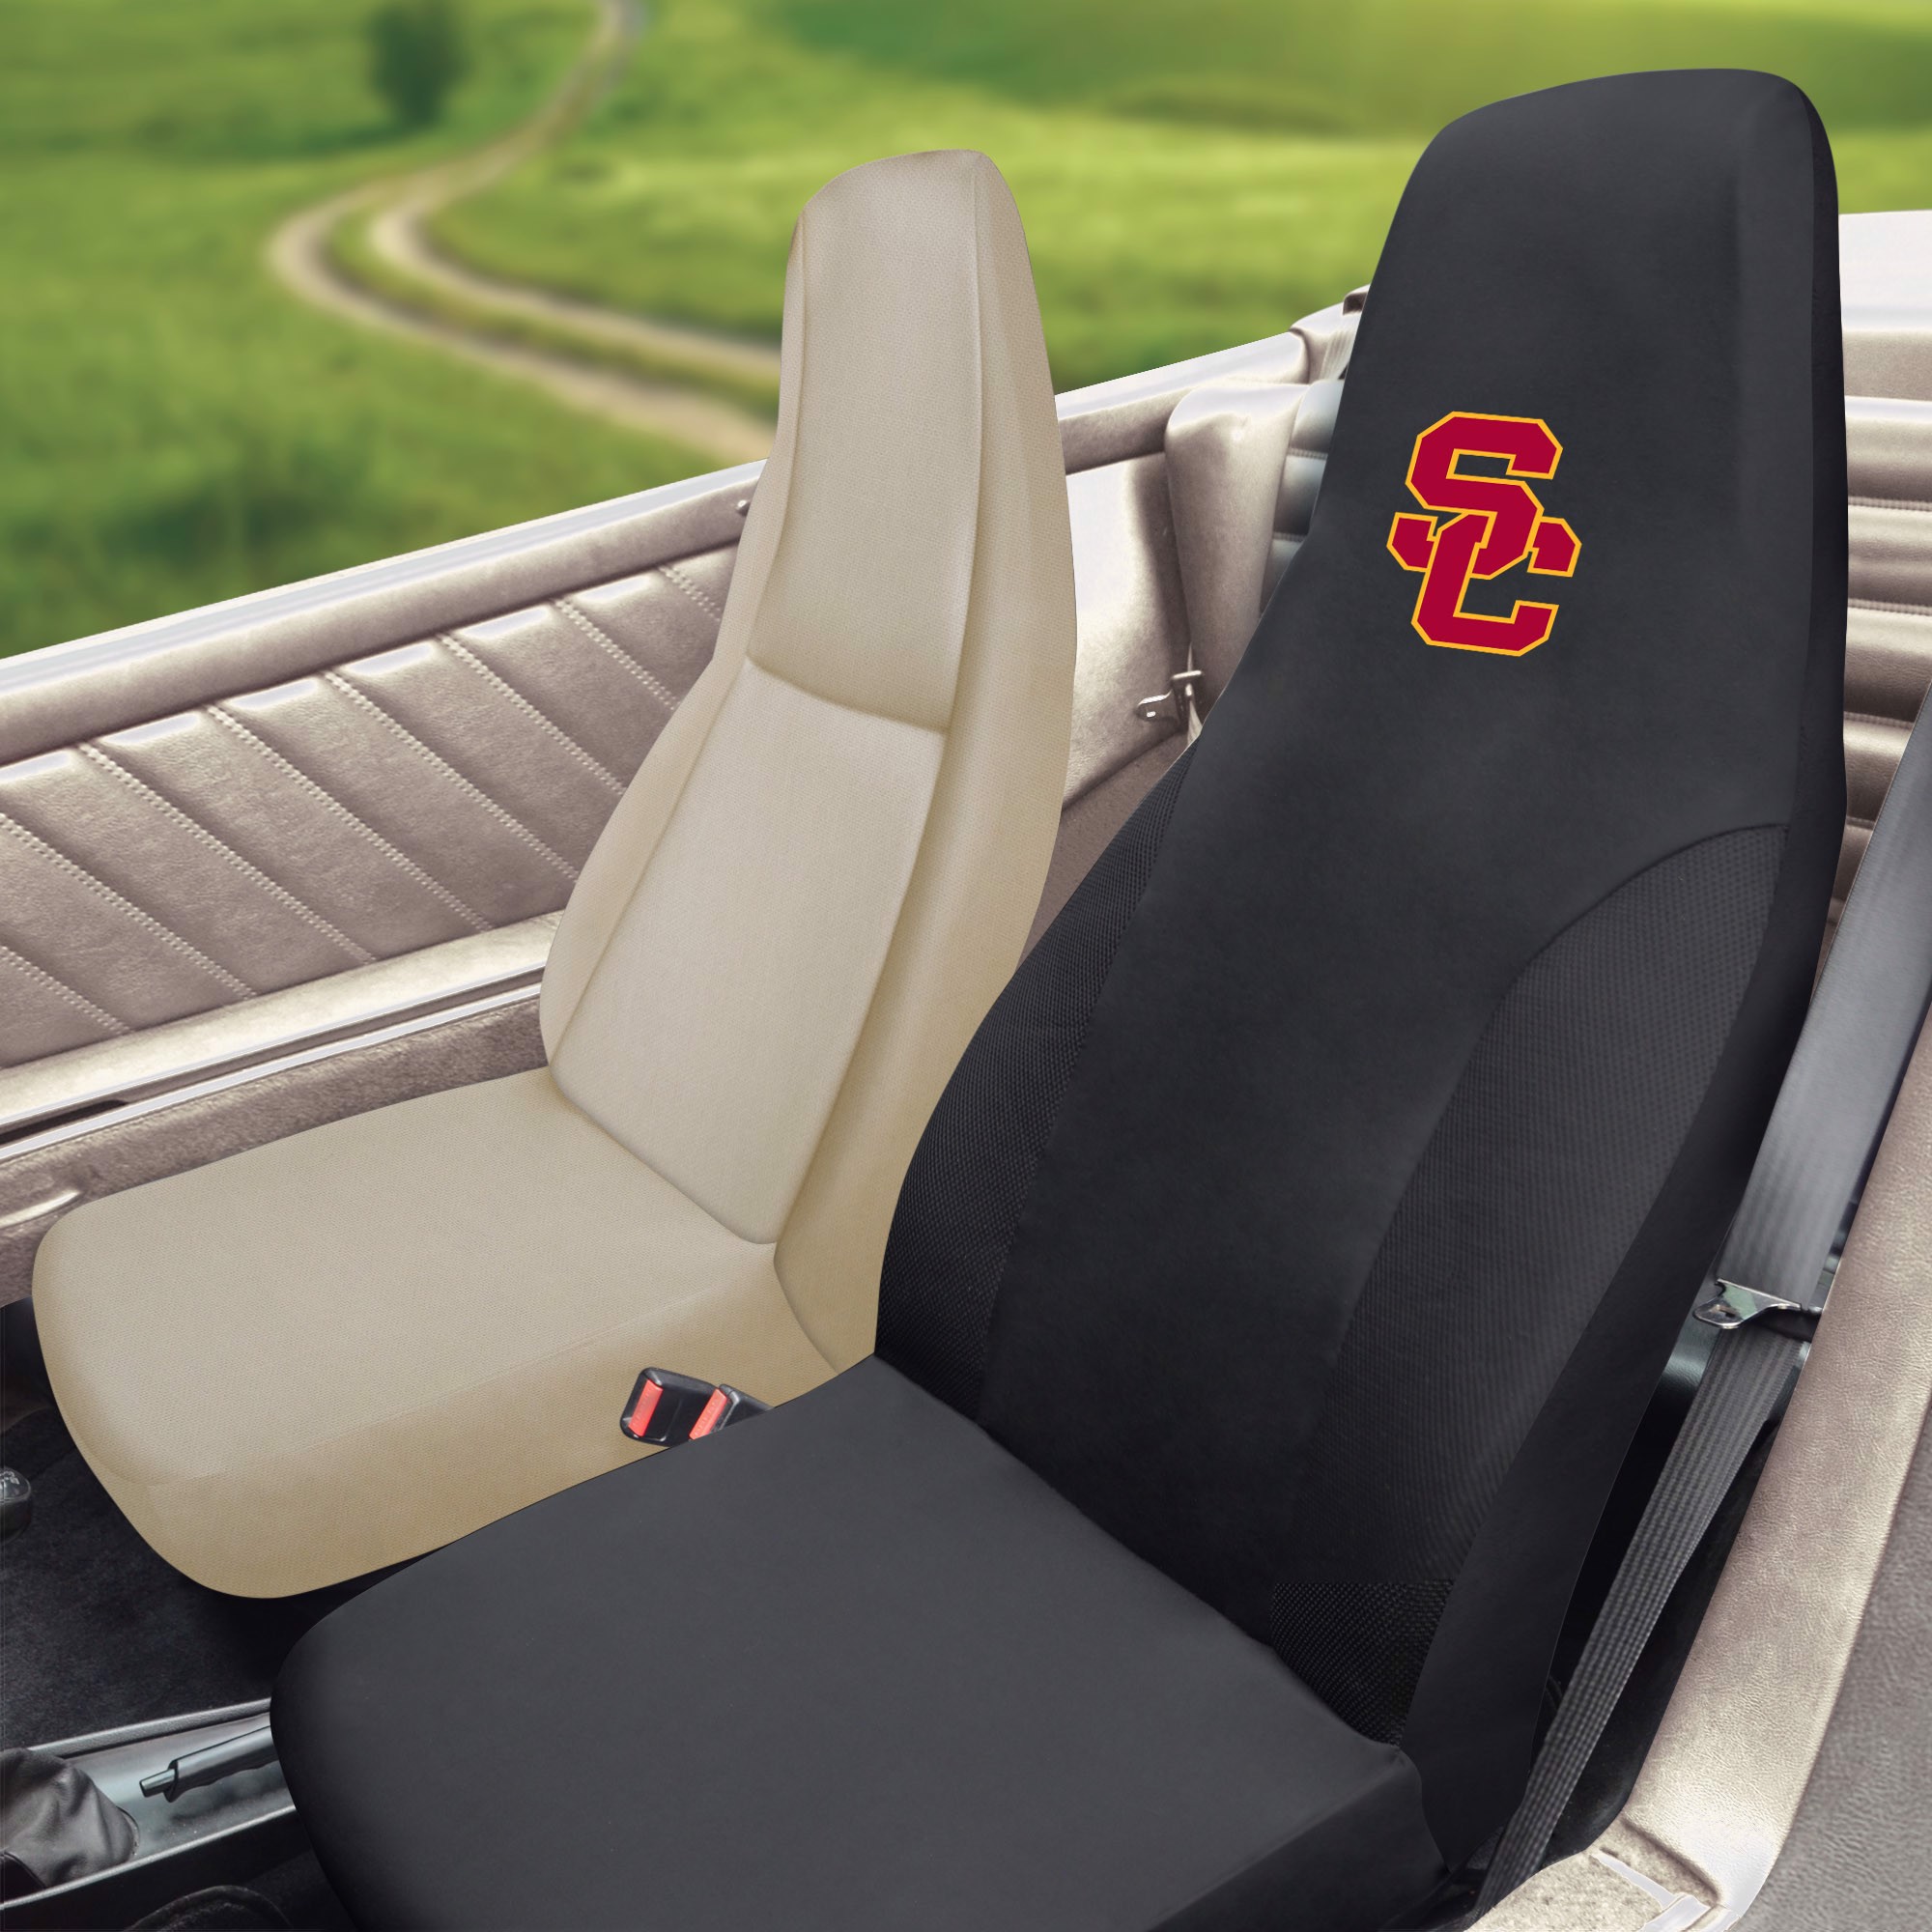 Southern California Seat Cover